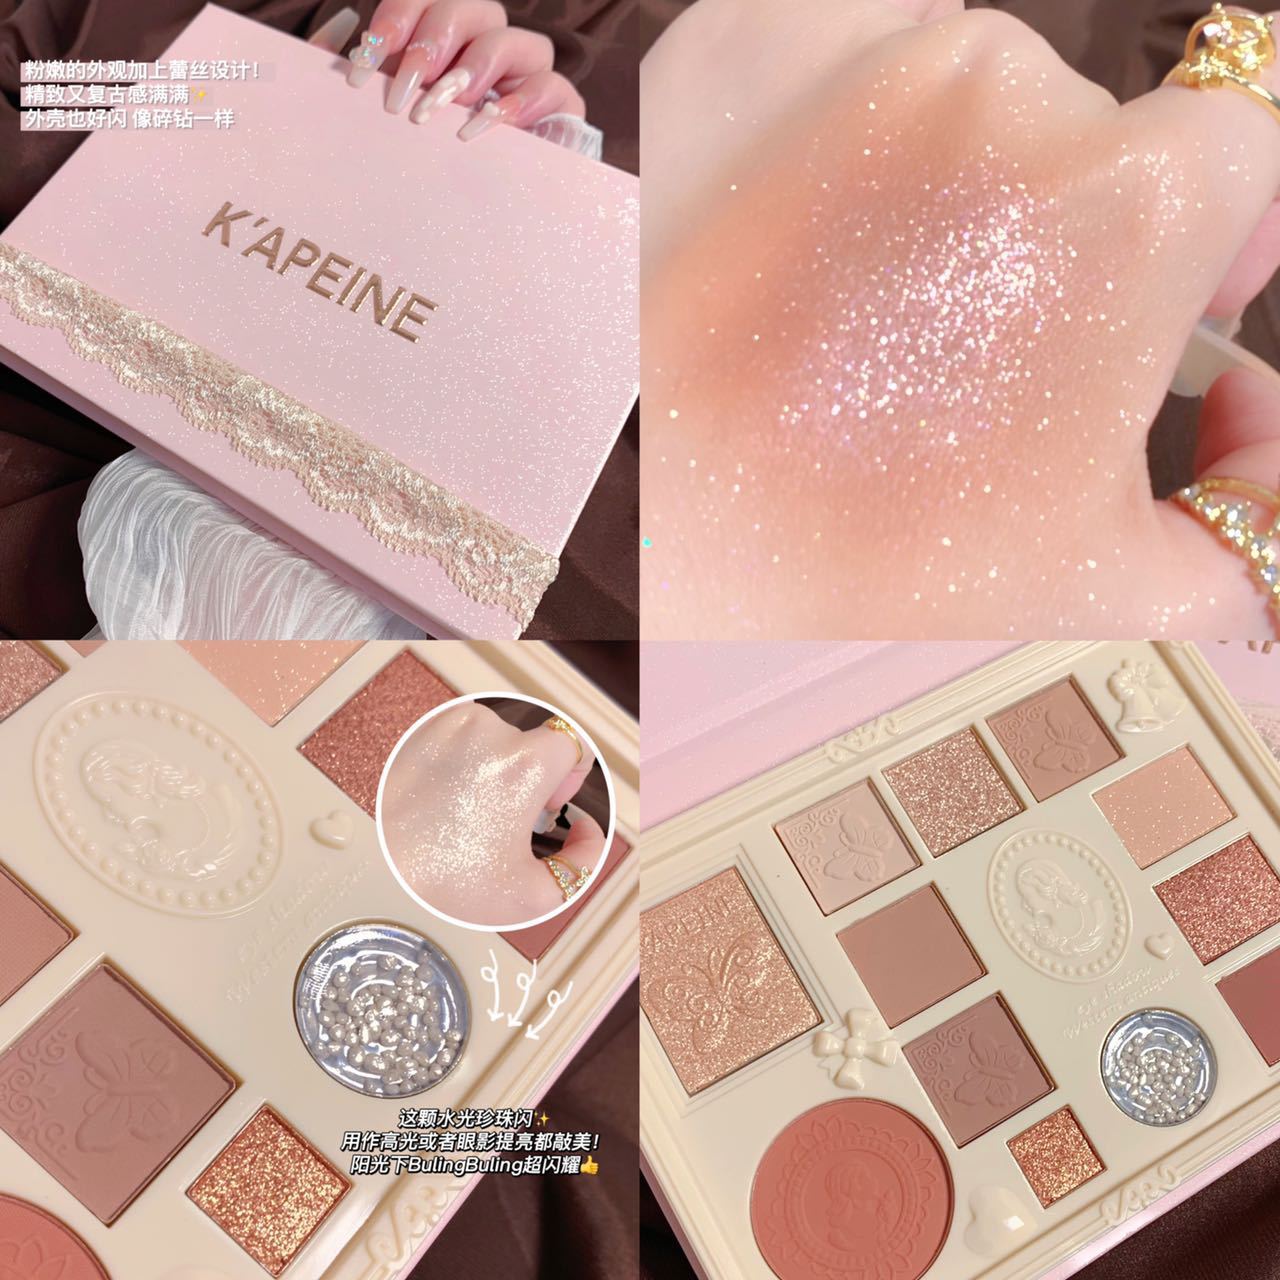 Makeup Cappel Lace Eyeshadow Low Saturation Shimmer Matte Glitter Repair Highlight Blush Crispy Chocolate with Rice Filling Makeup Palette